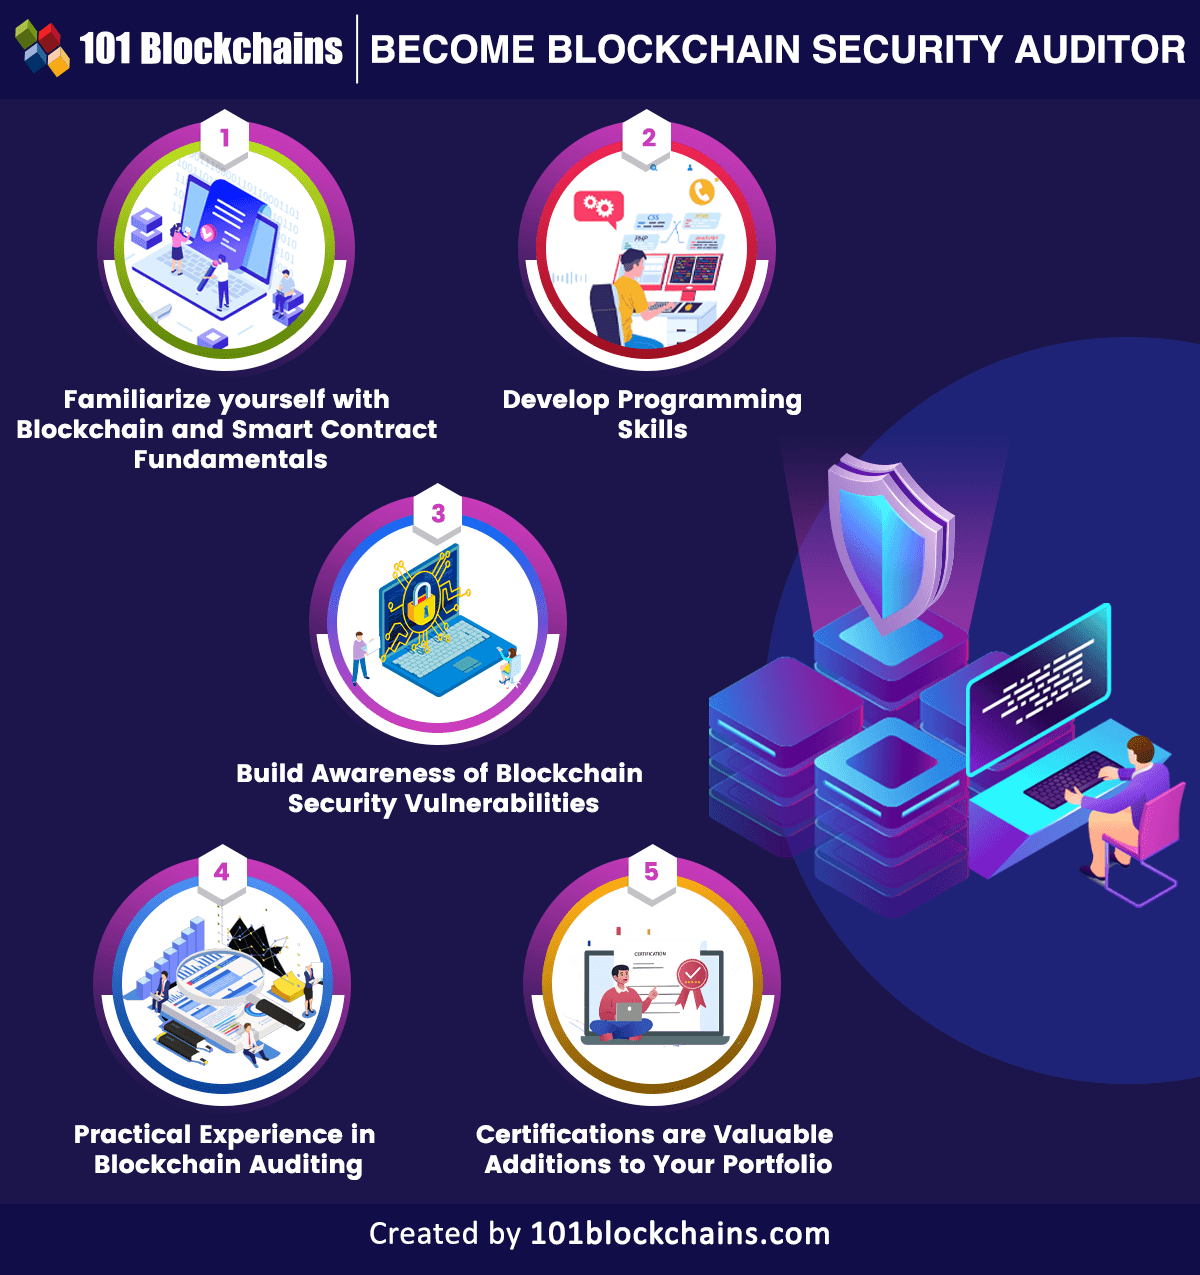 Become Blockchain Security Auditor